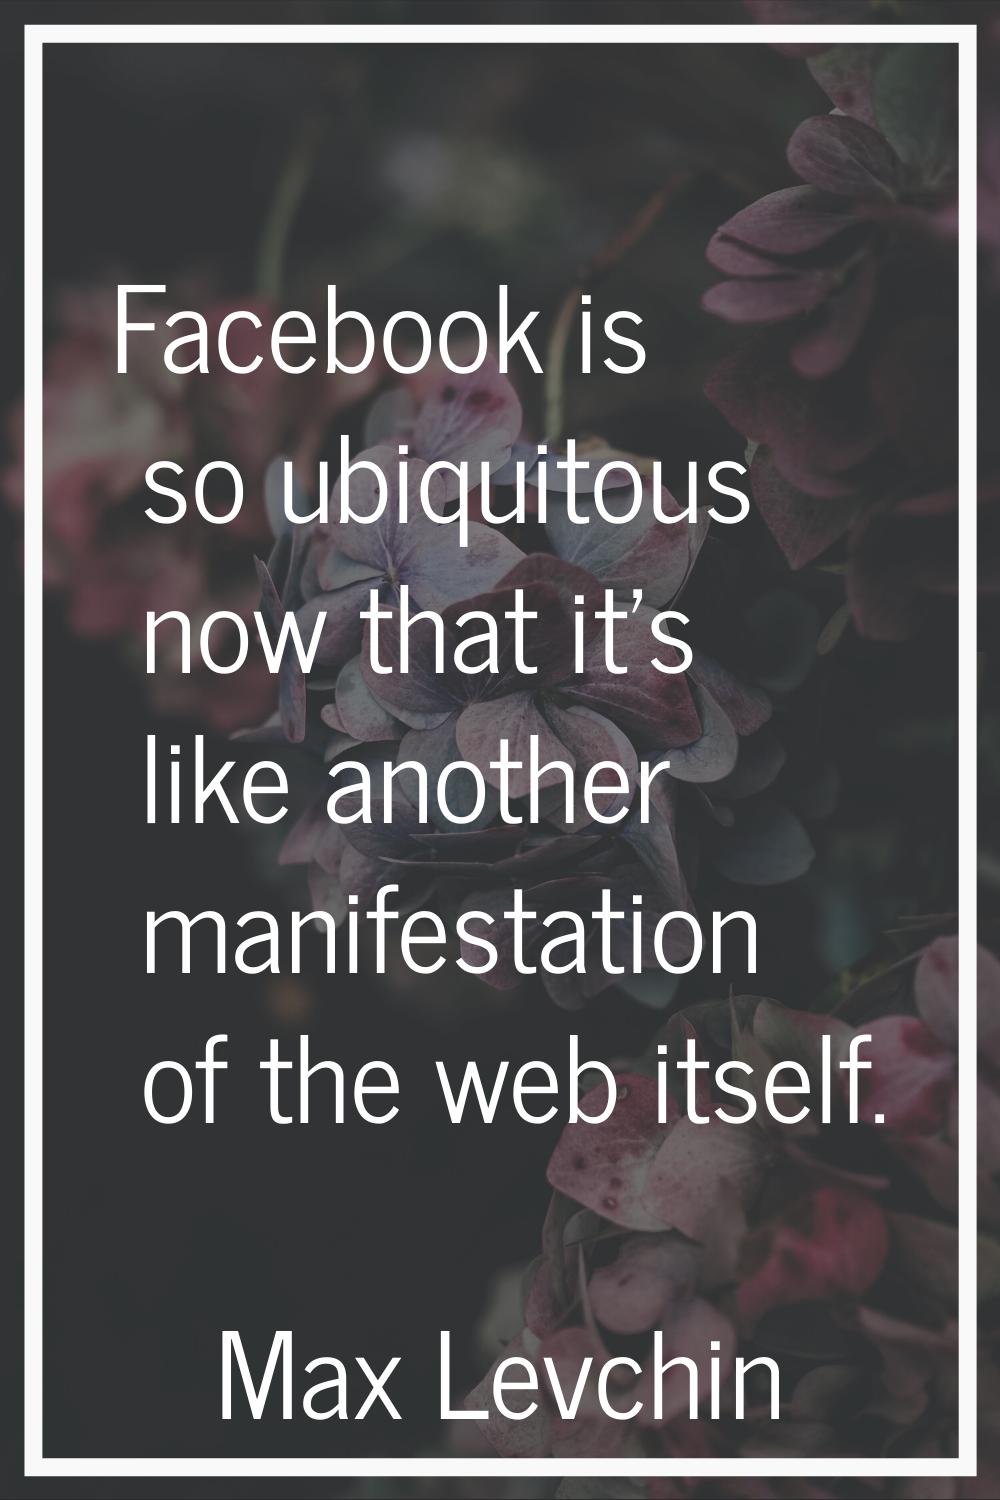 Facebook is so ubiquitous now that it's like another manifestation of the web itself.